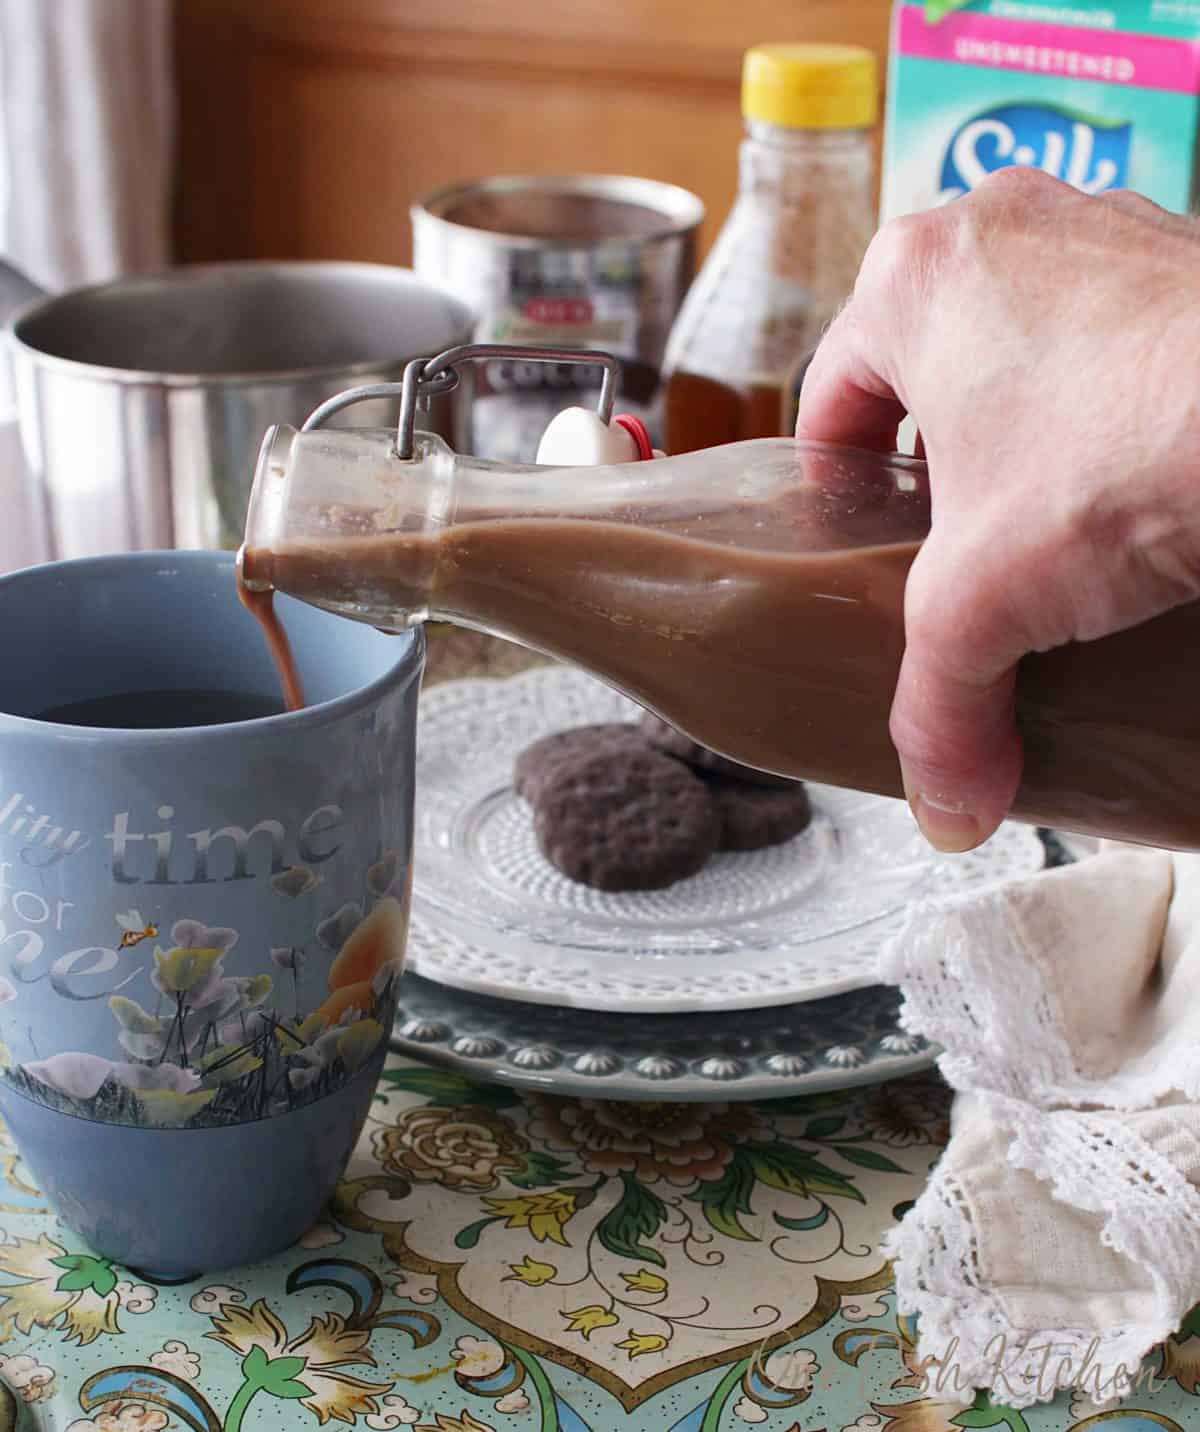 Pouring chocolate coffee creamer into a mug of coffee that is on a metal tray with a small plate of cookies.